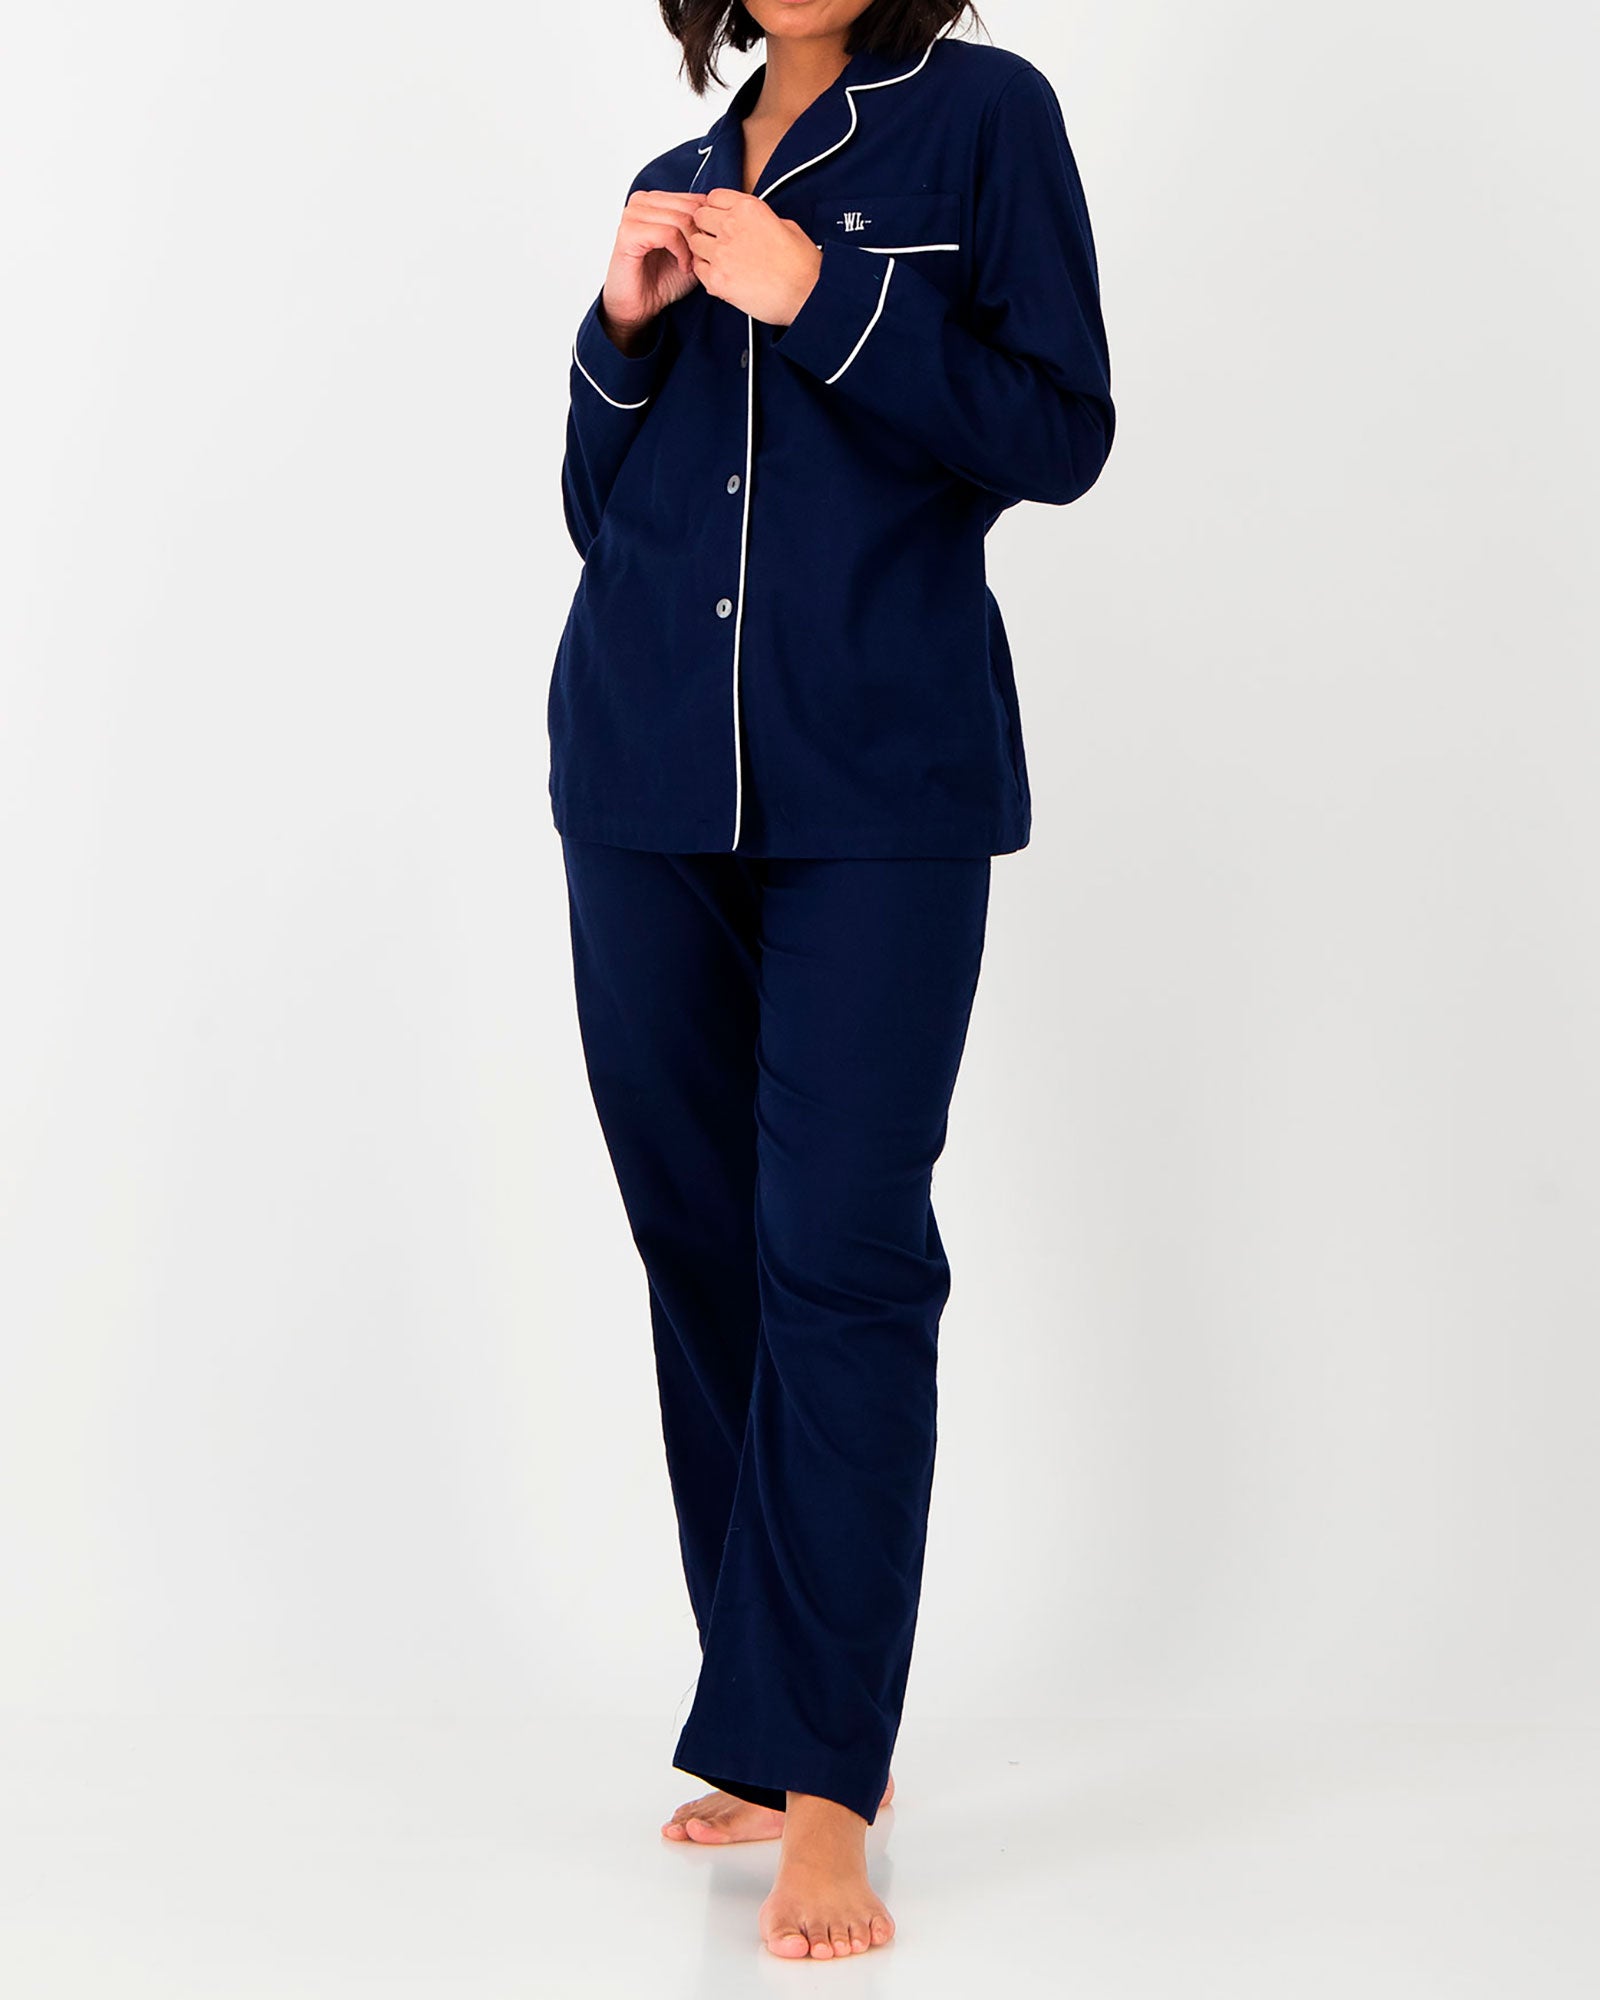 Womens Long Flannel Pyjamas Navy with White Piping Front - Woodstock Laundry UK